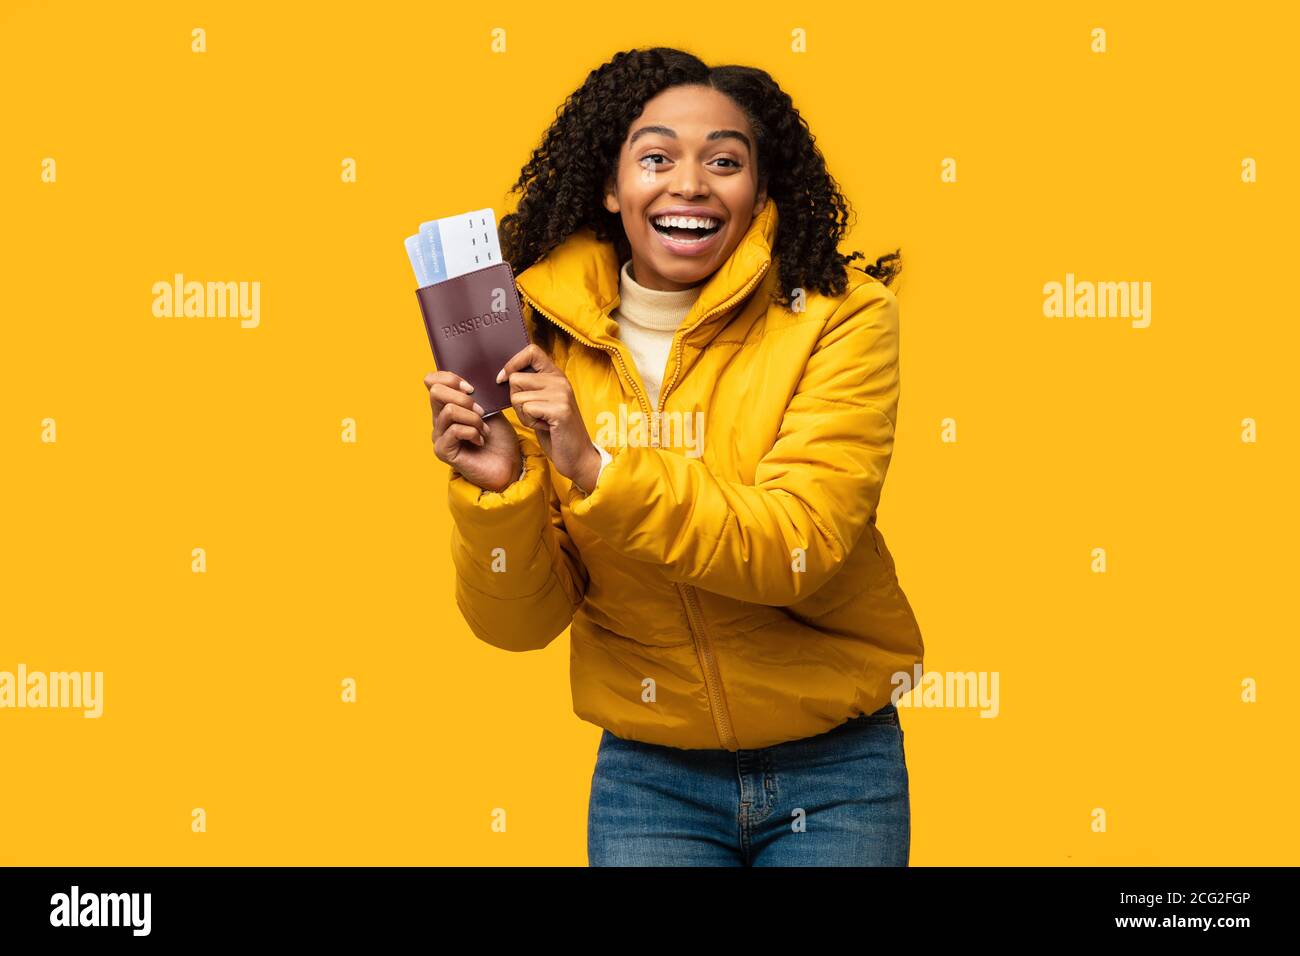 Black Girl Showing Tickets Going On Winter Vacation, Yellow Background Stock Photo